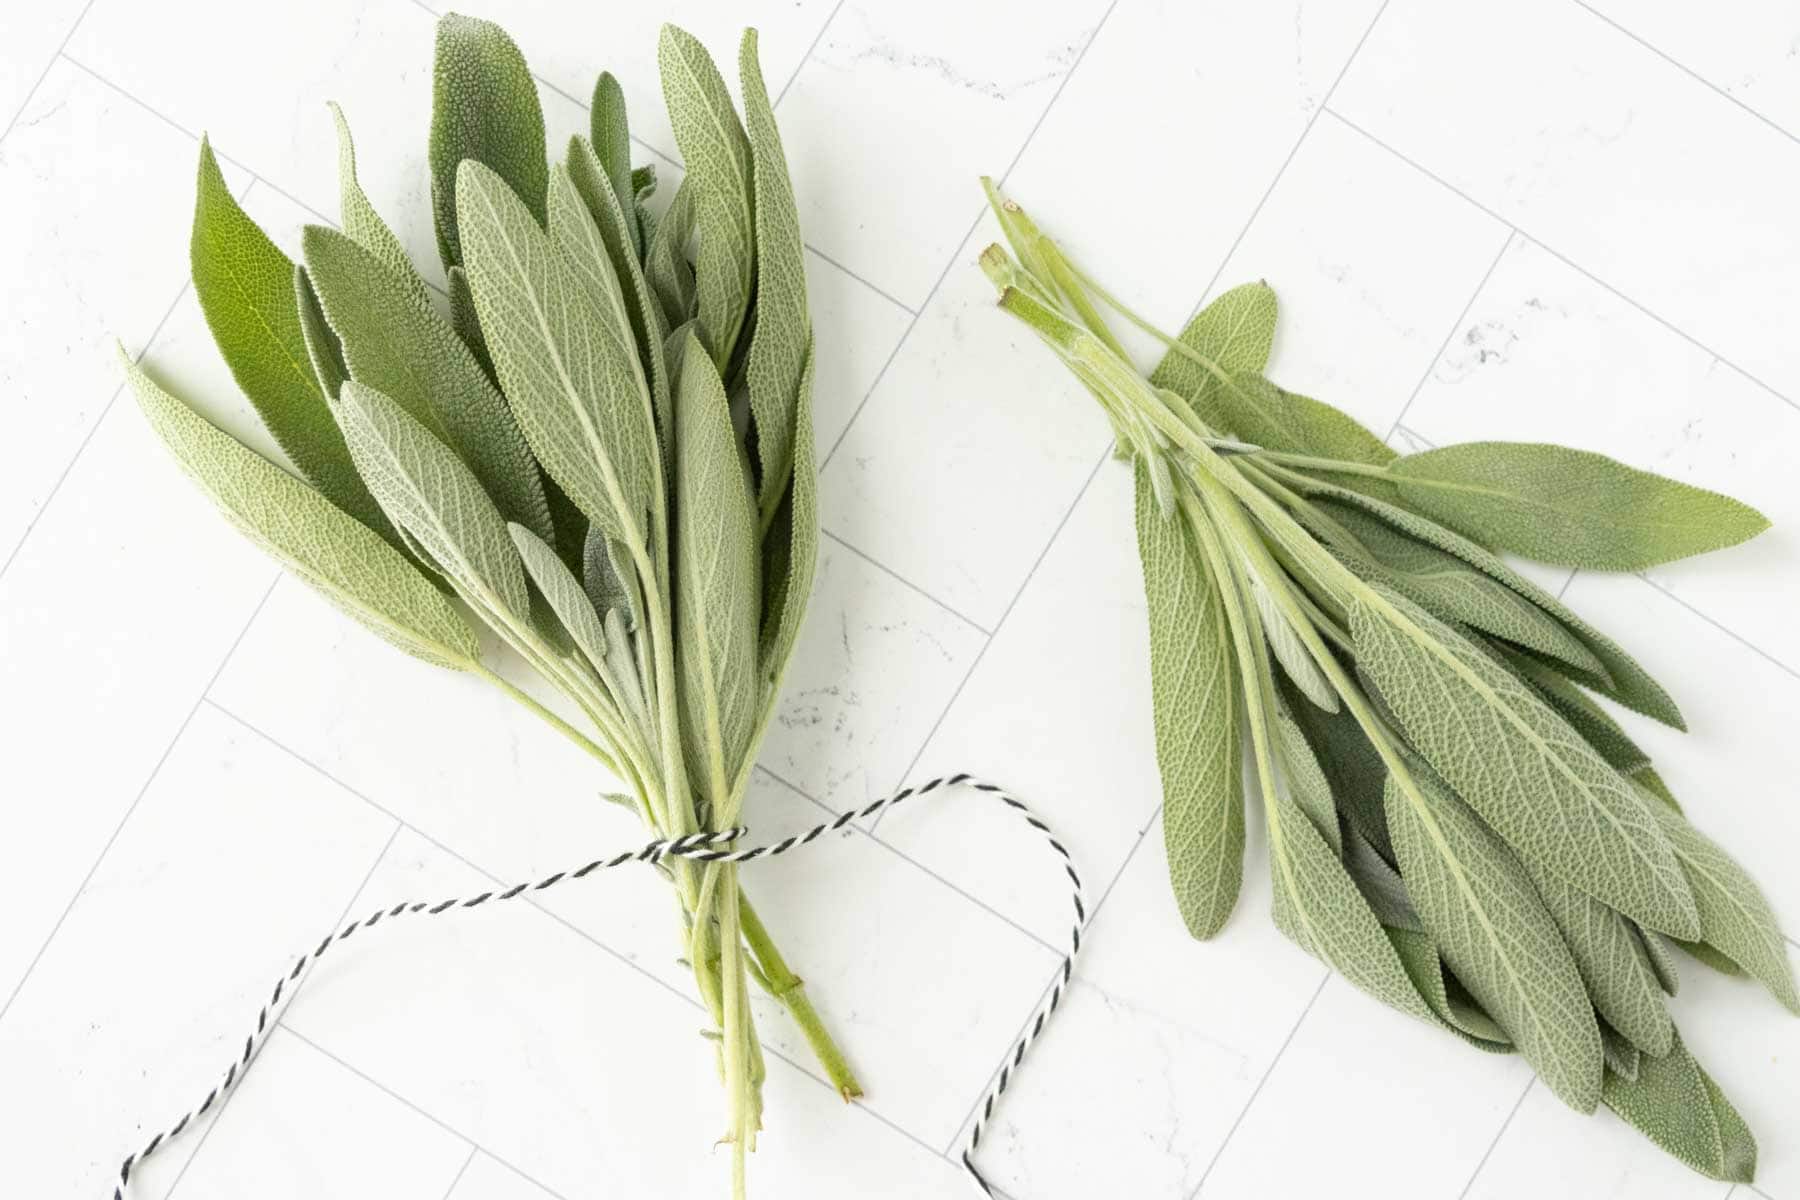 Two sage bundles tied together with a string.